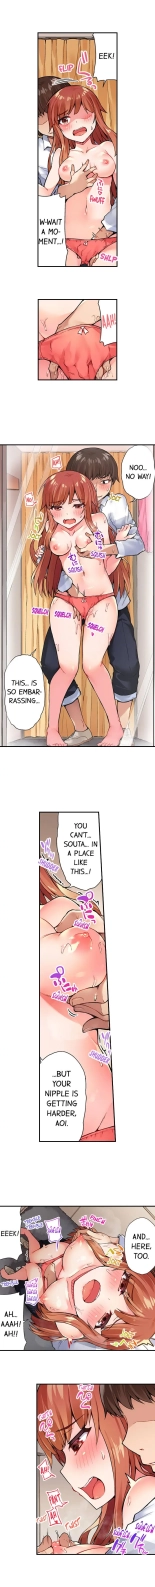 Traditional Job of Washing Girls' Body Ch. 1-171 : page 215